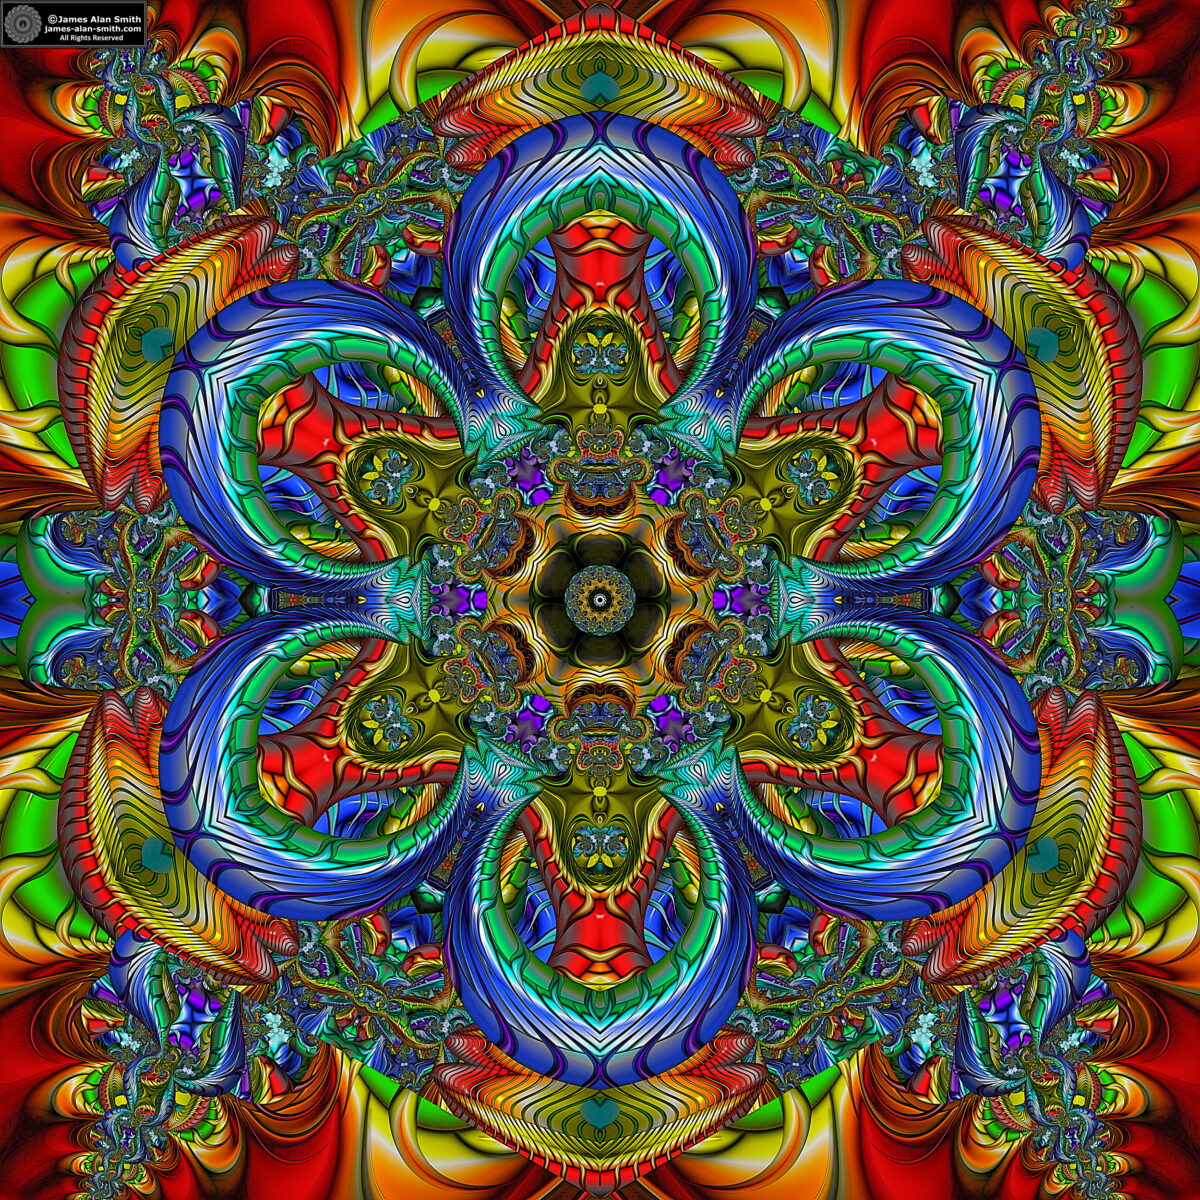 Blooming Fractal: Artwork by James Alan Smith